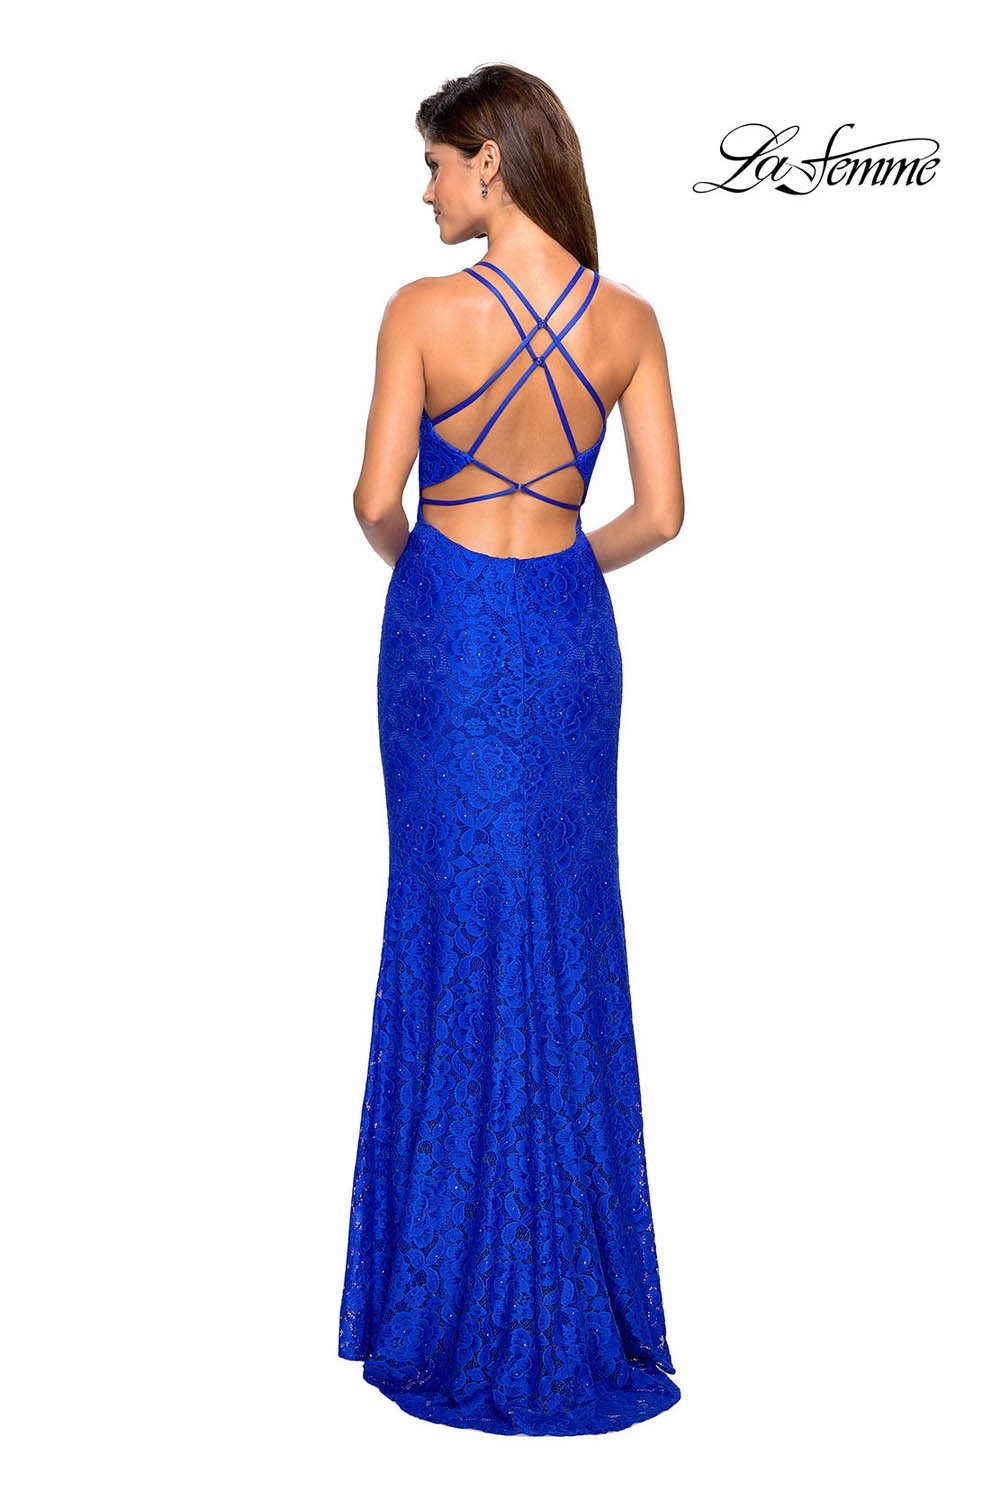 La Femme 27046 dress images in these colors: Electric Blue, Red, White.